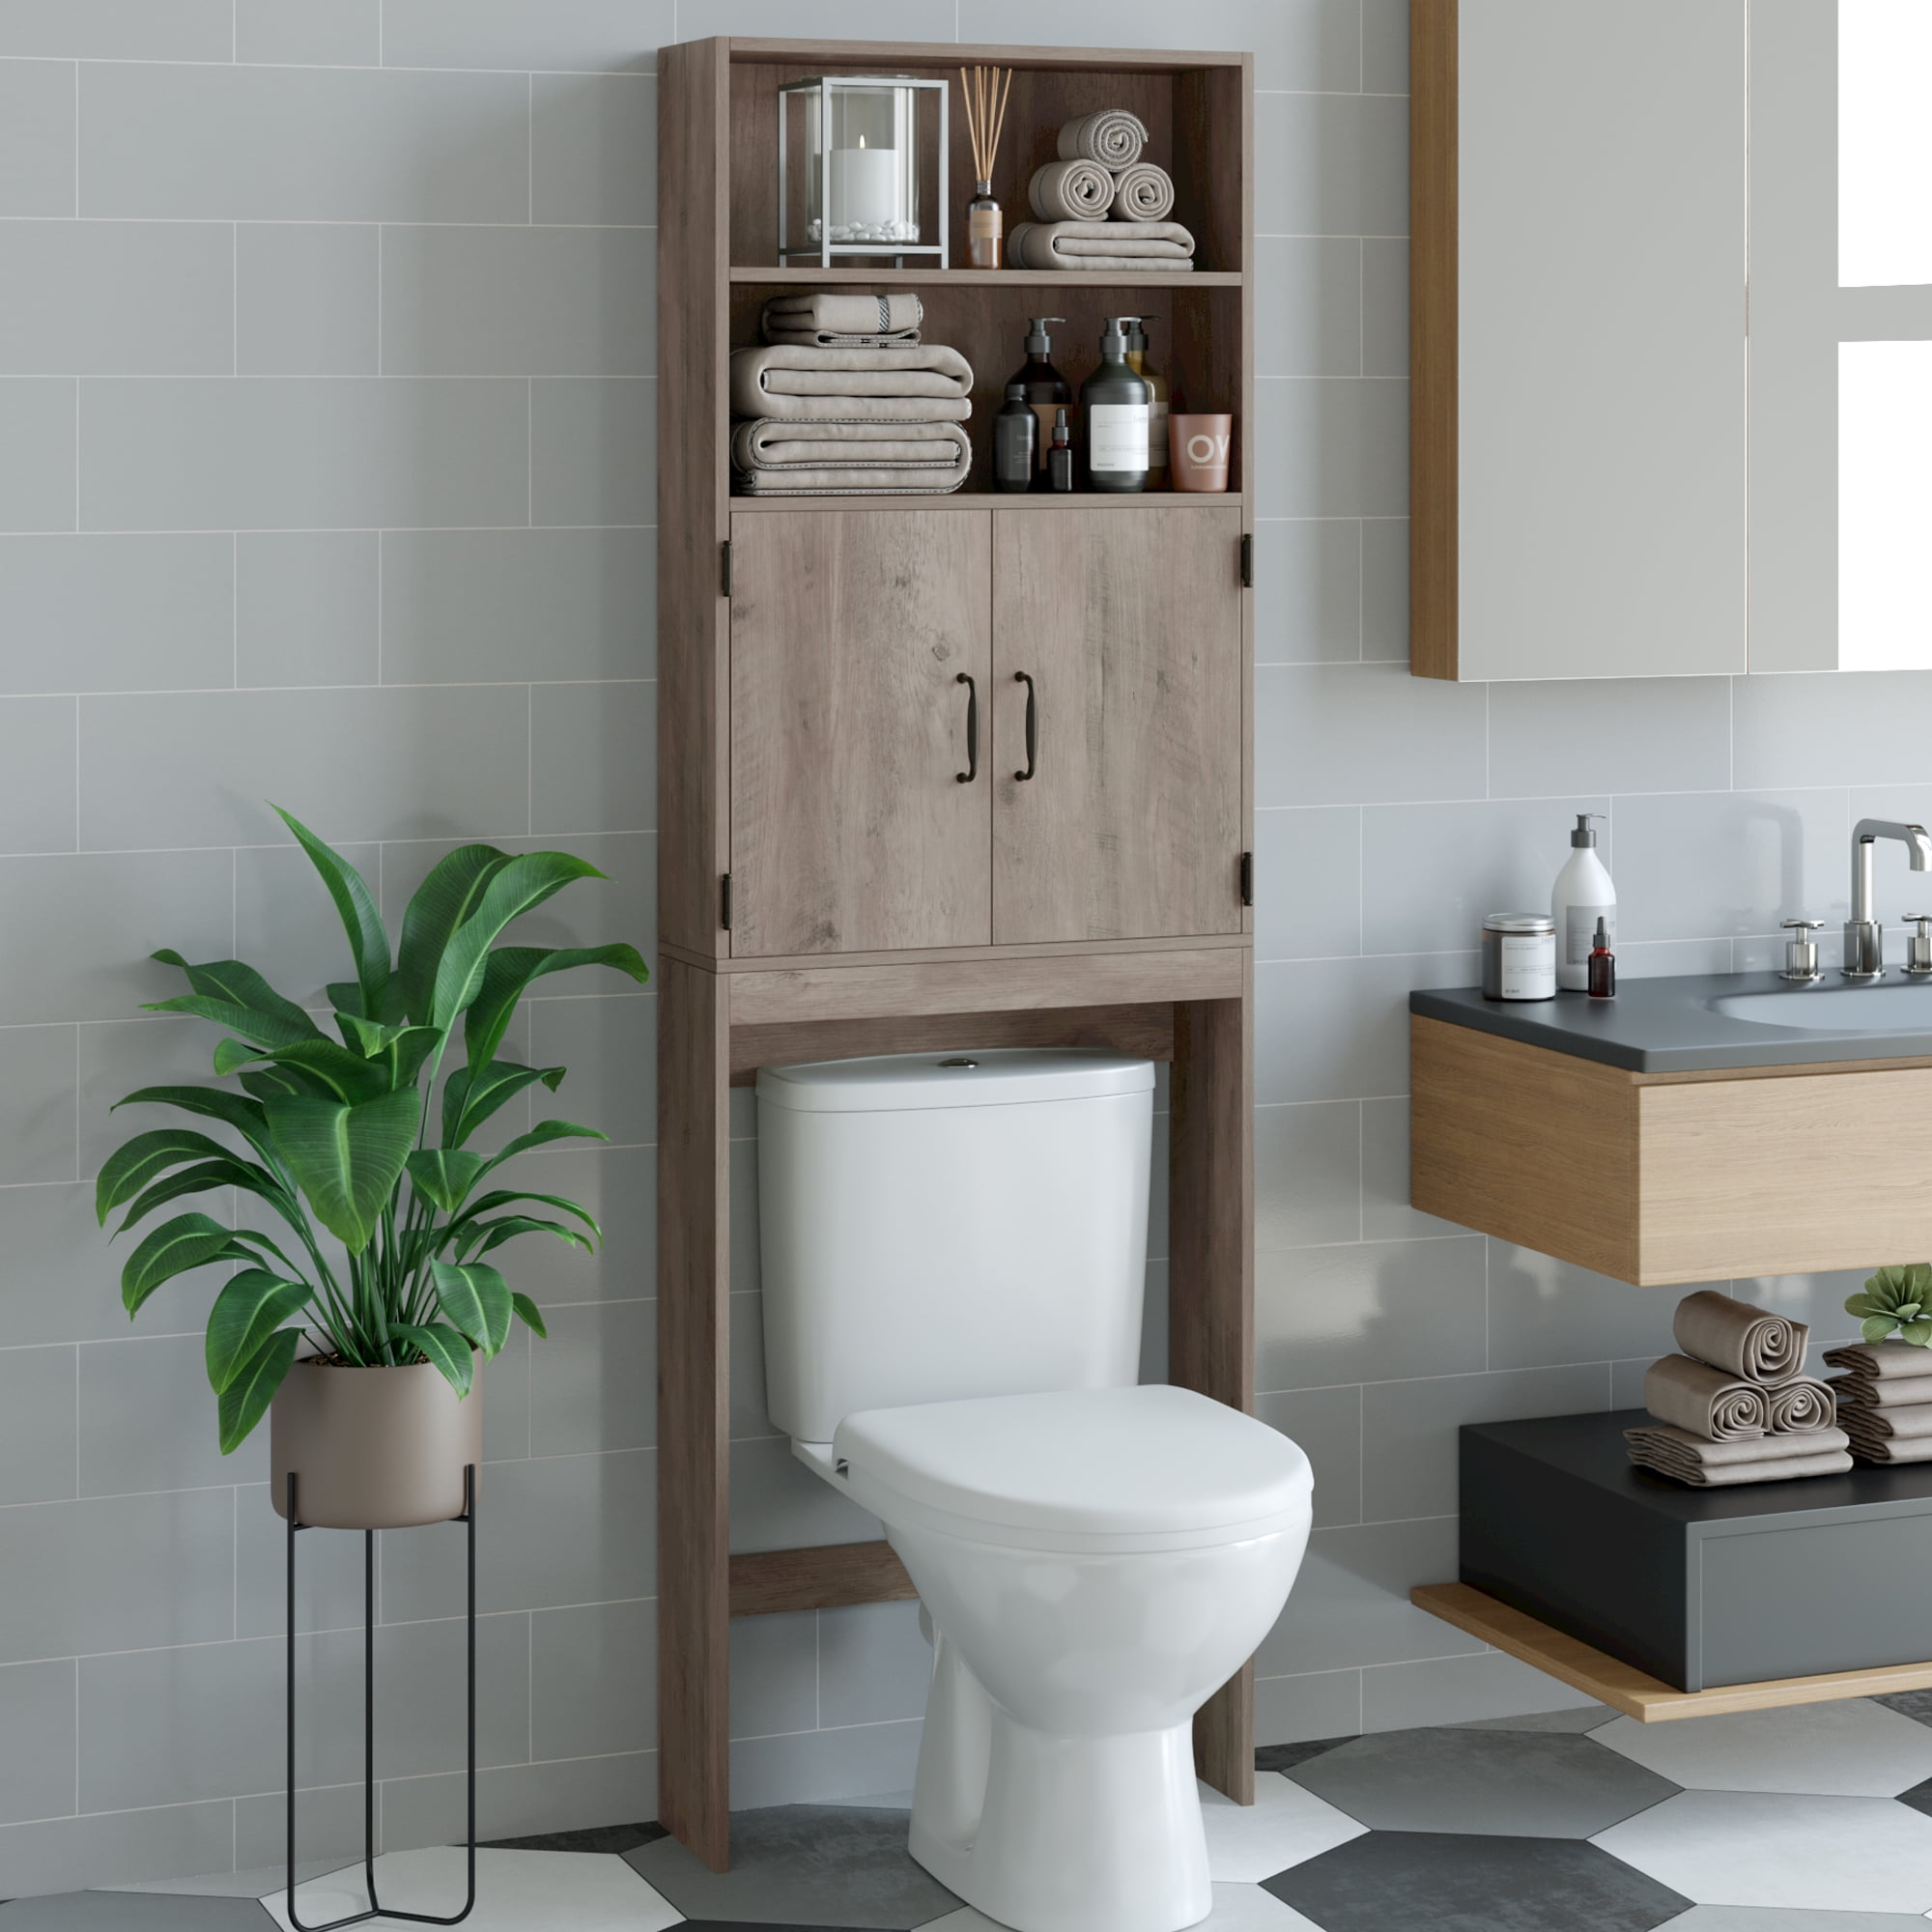 Homeika Bathroom Storage Cabinet with 2 Doors and 2 Shelves, 4 Tier Design  Toilet Paper Storage Stand for Small Space and Corner, L6.7 x W6 x H31